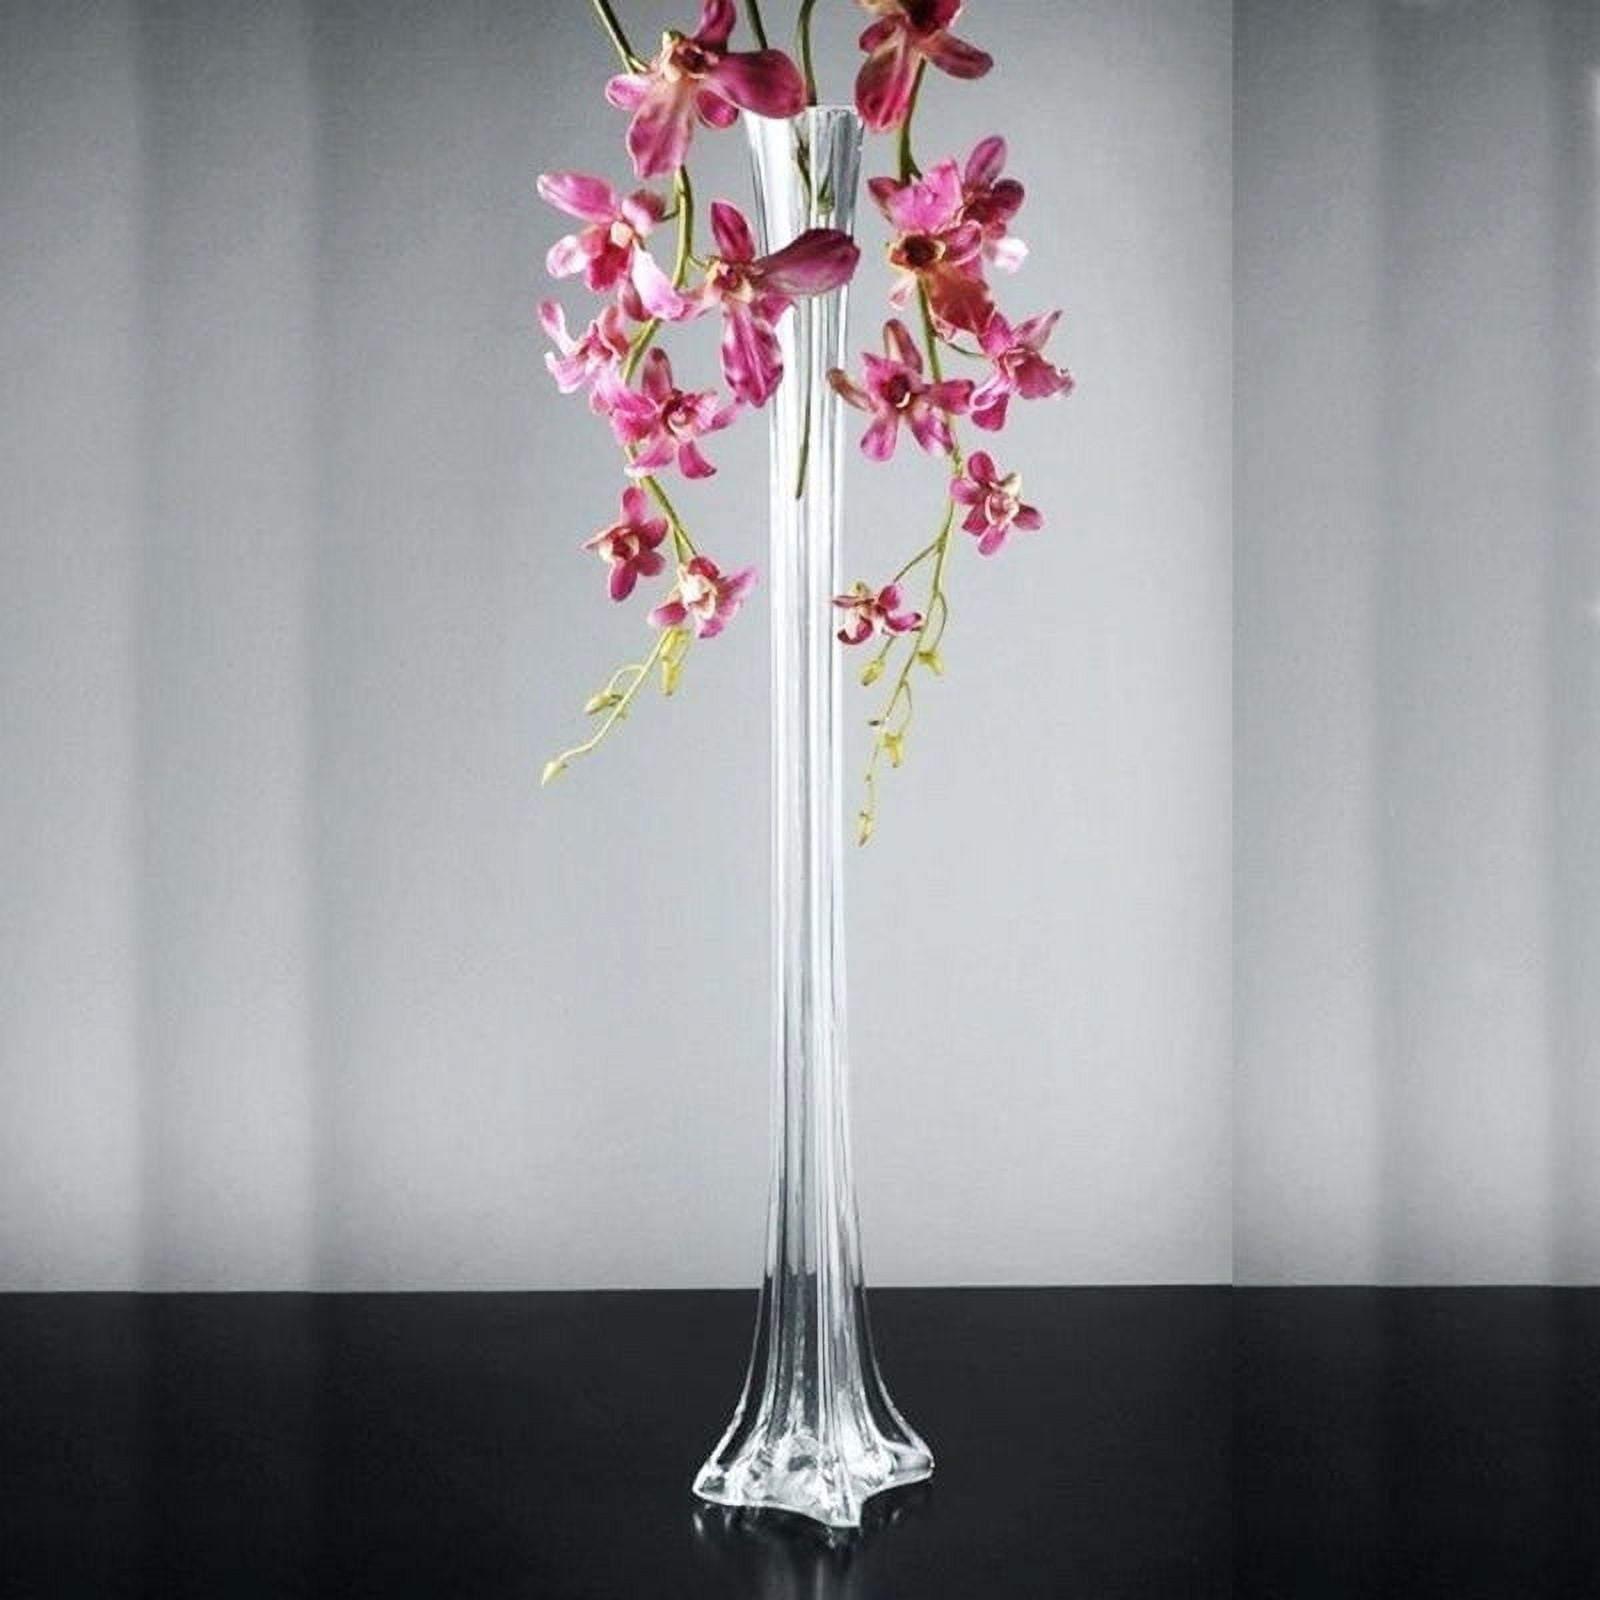 Guest table centerpiece on Eiffel Tower vase with white dendrobium